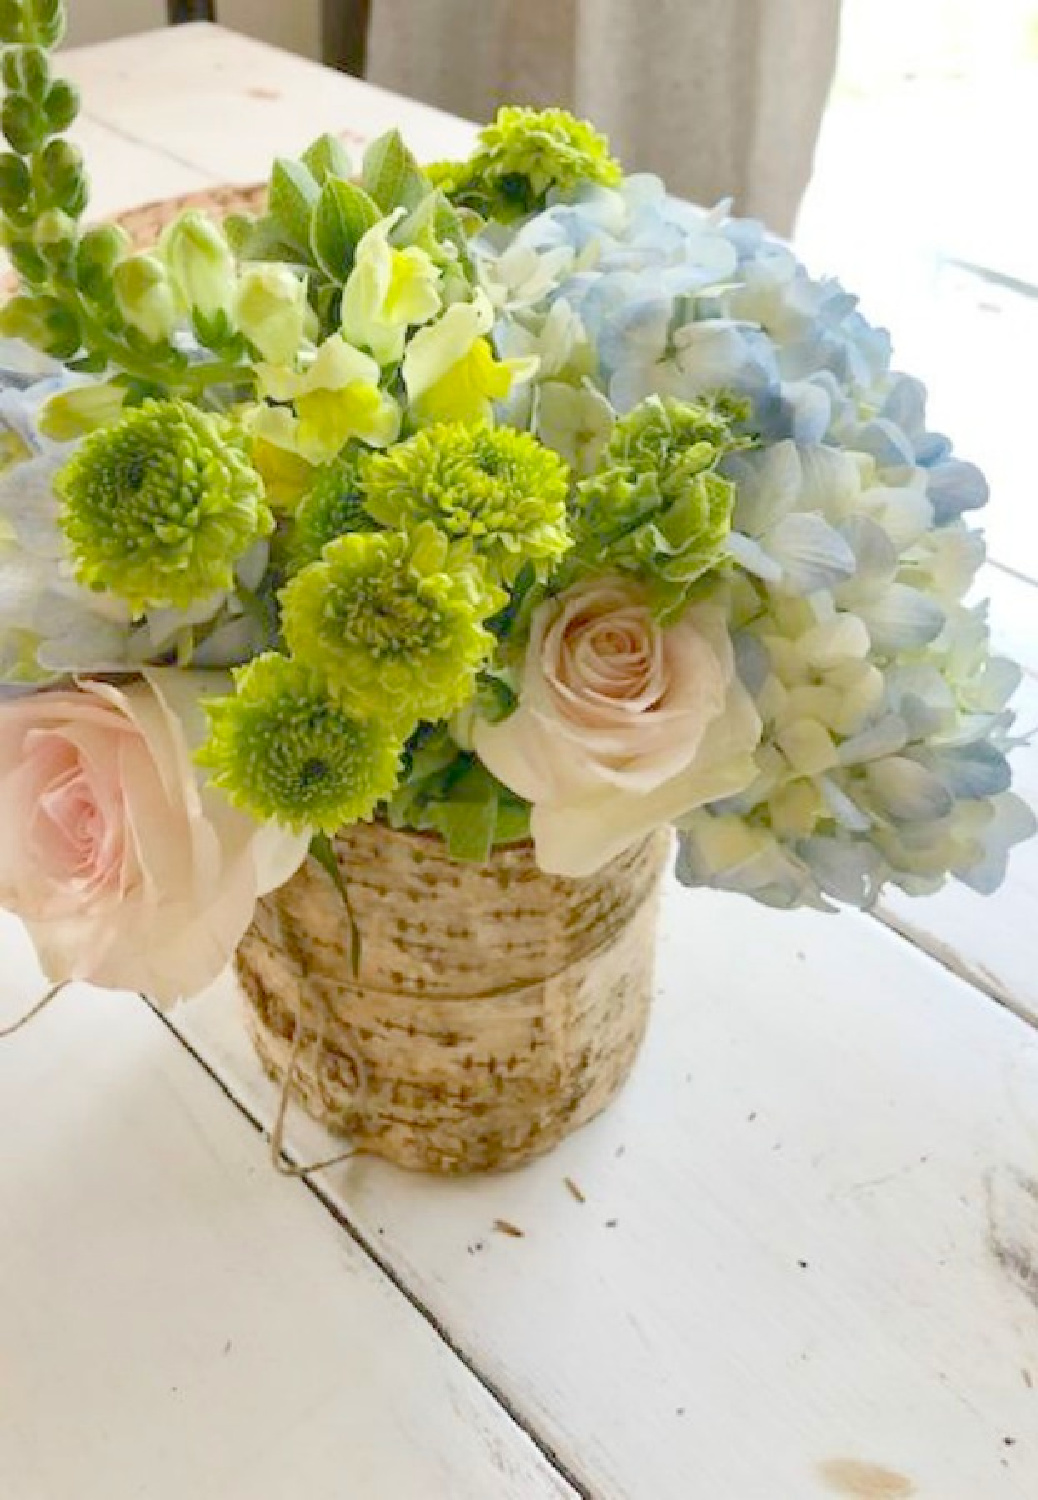 Spring flowers arranged in a birch bark vase (hydrangea, roses, and other florals) - Hello Lovely Studio. #springflorals #hydrangeaandroses